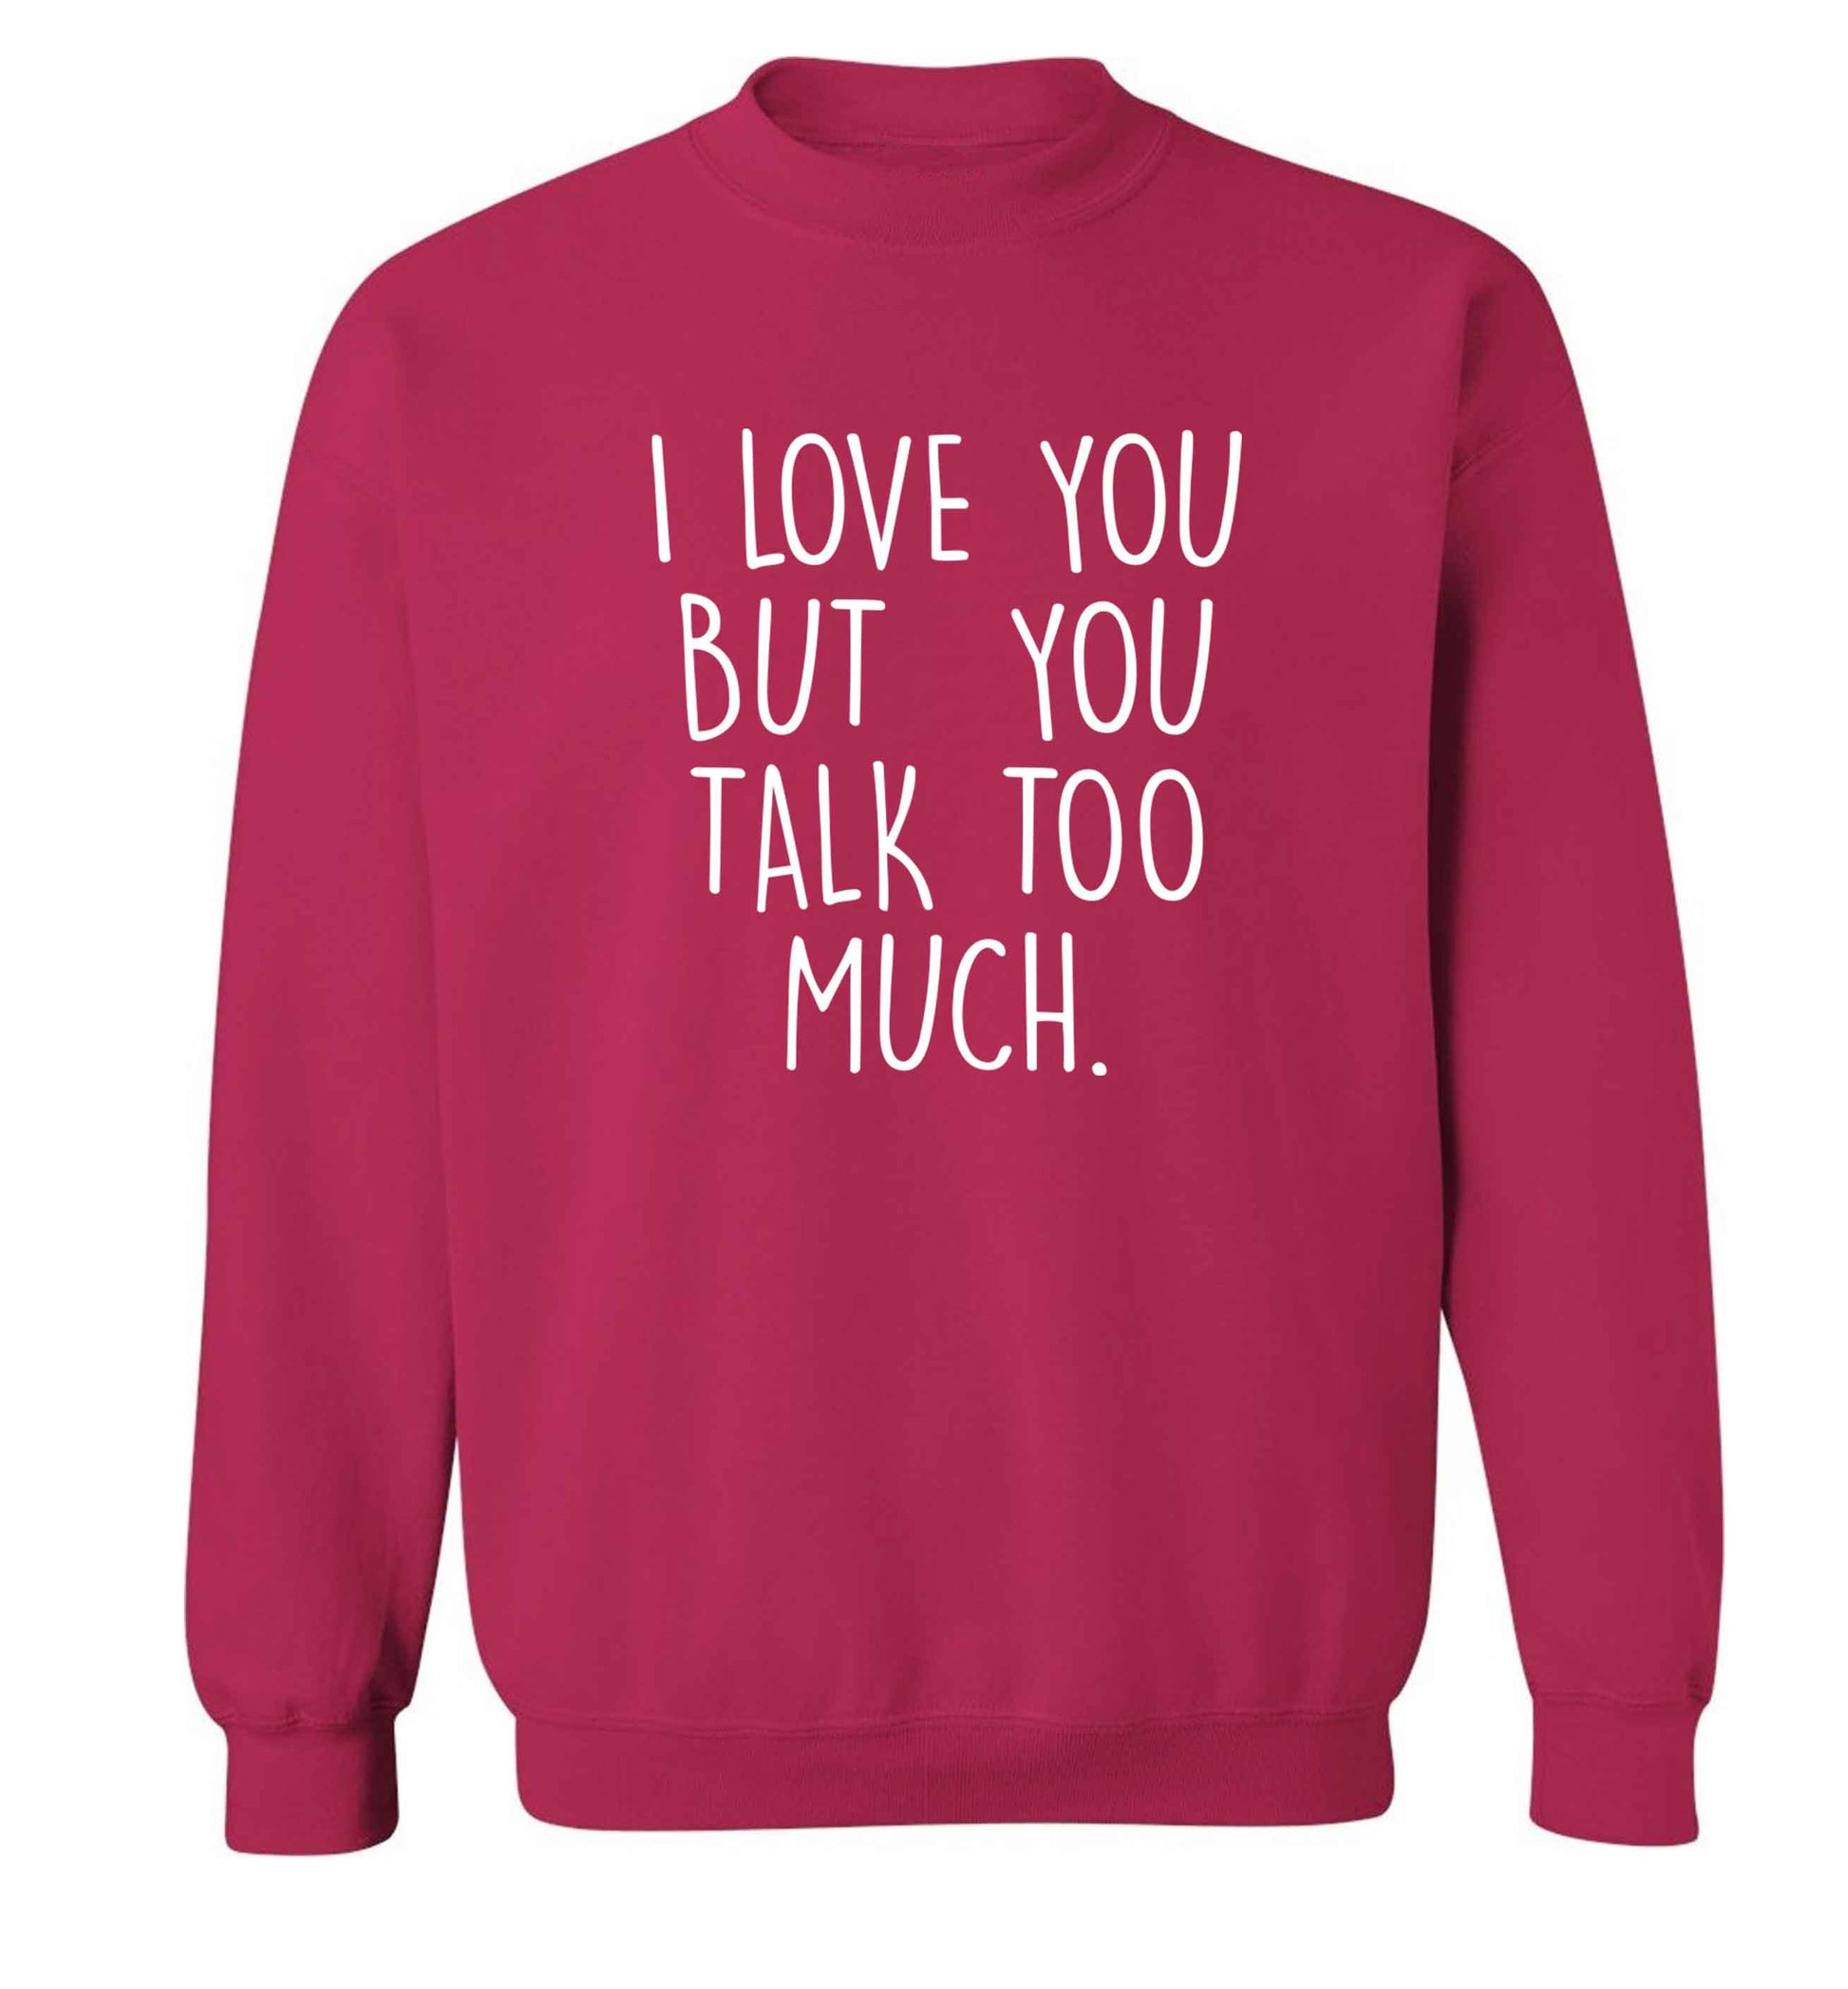 I love you but you talk too much adult's unisex pink sweater 2XL